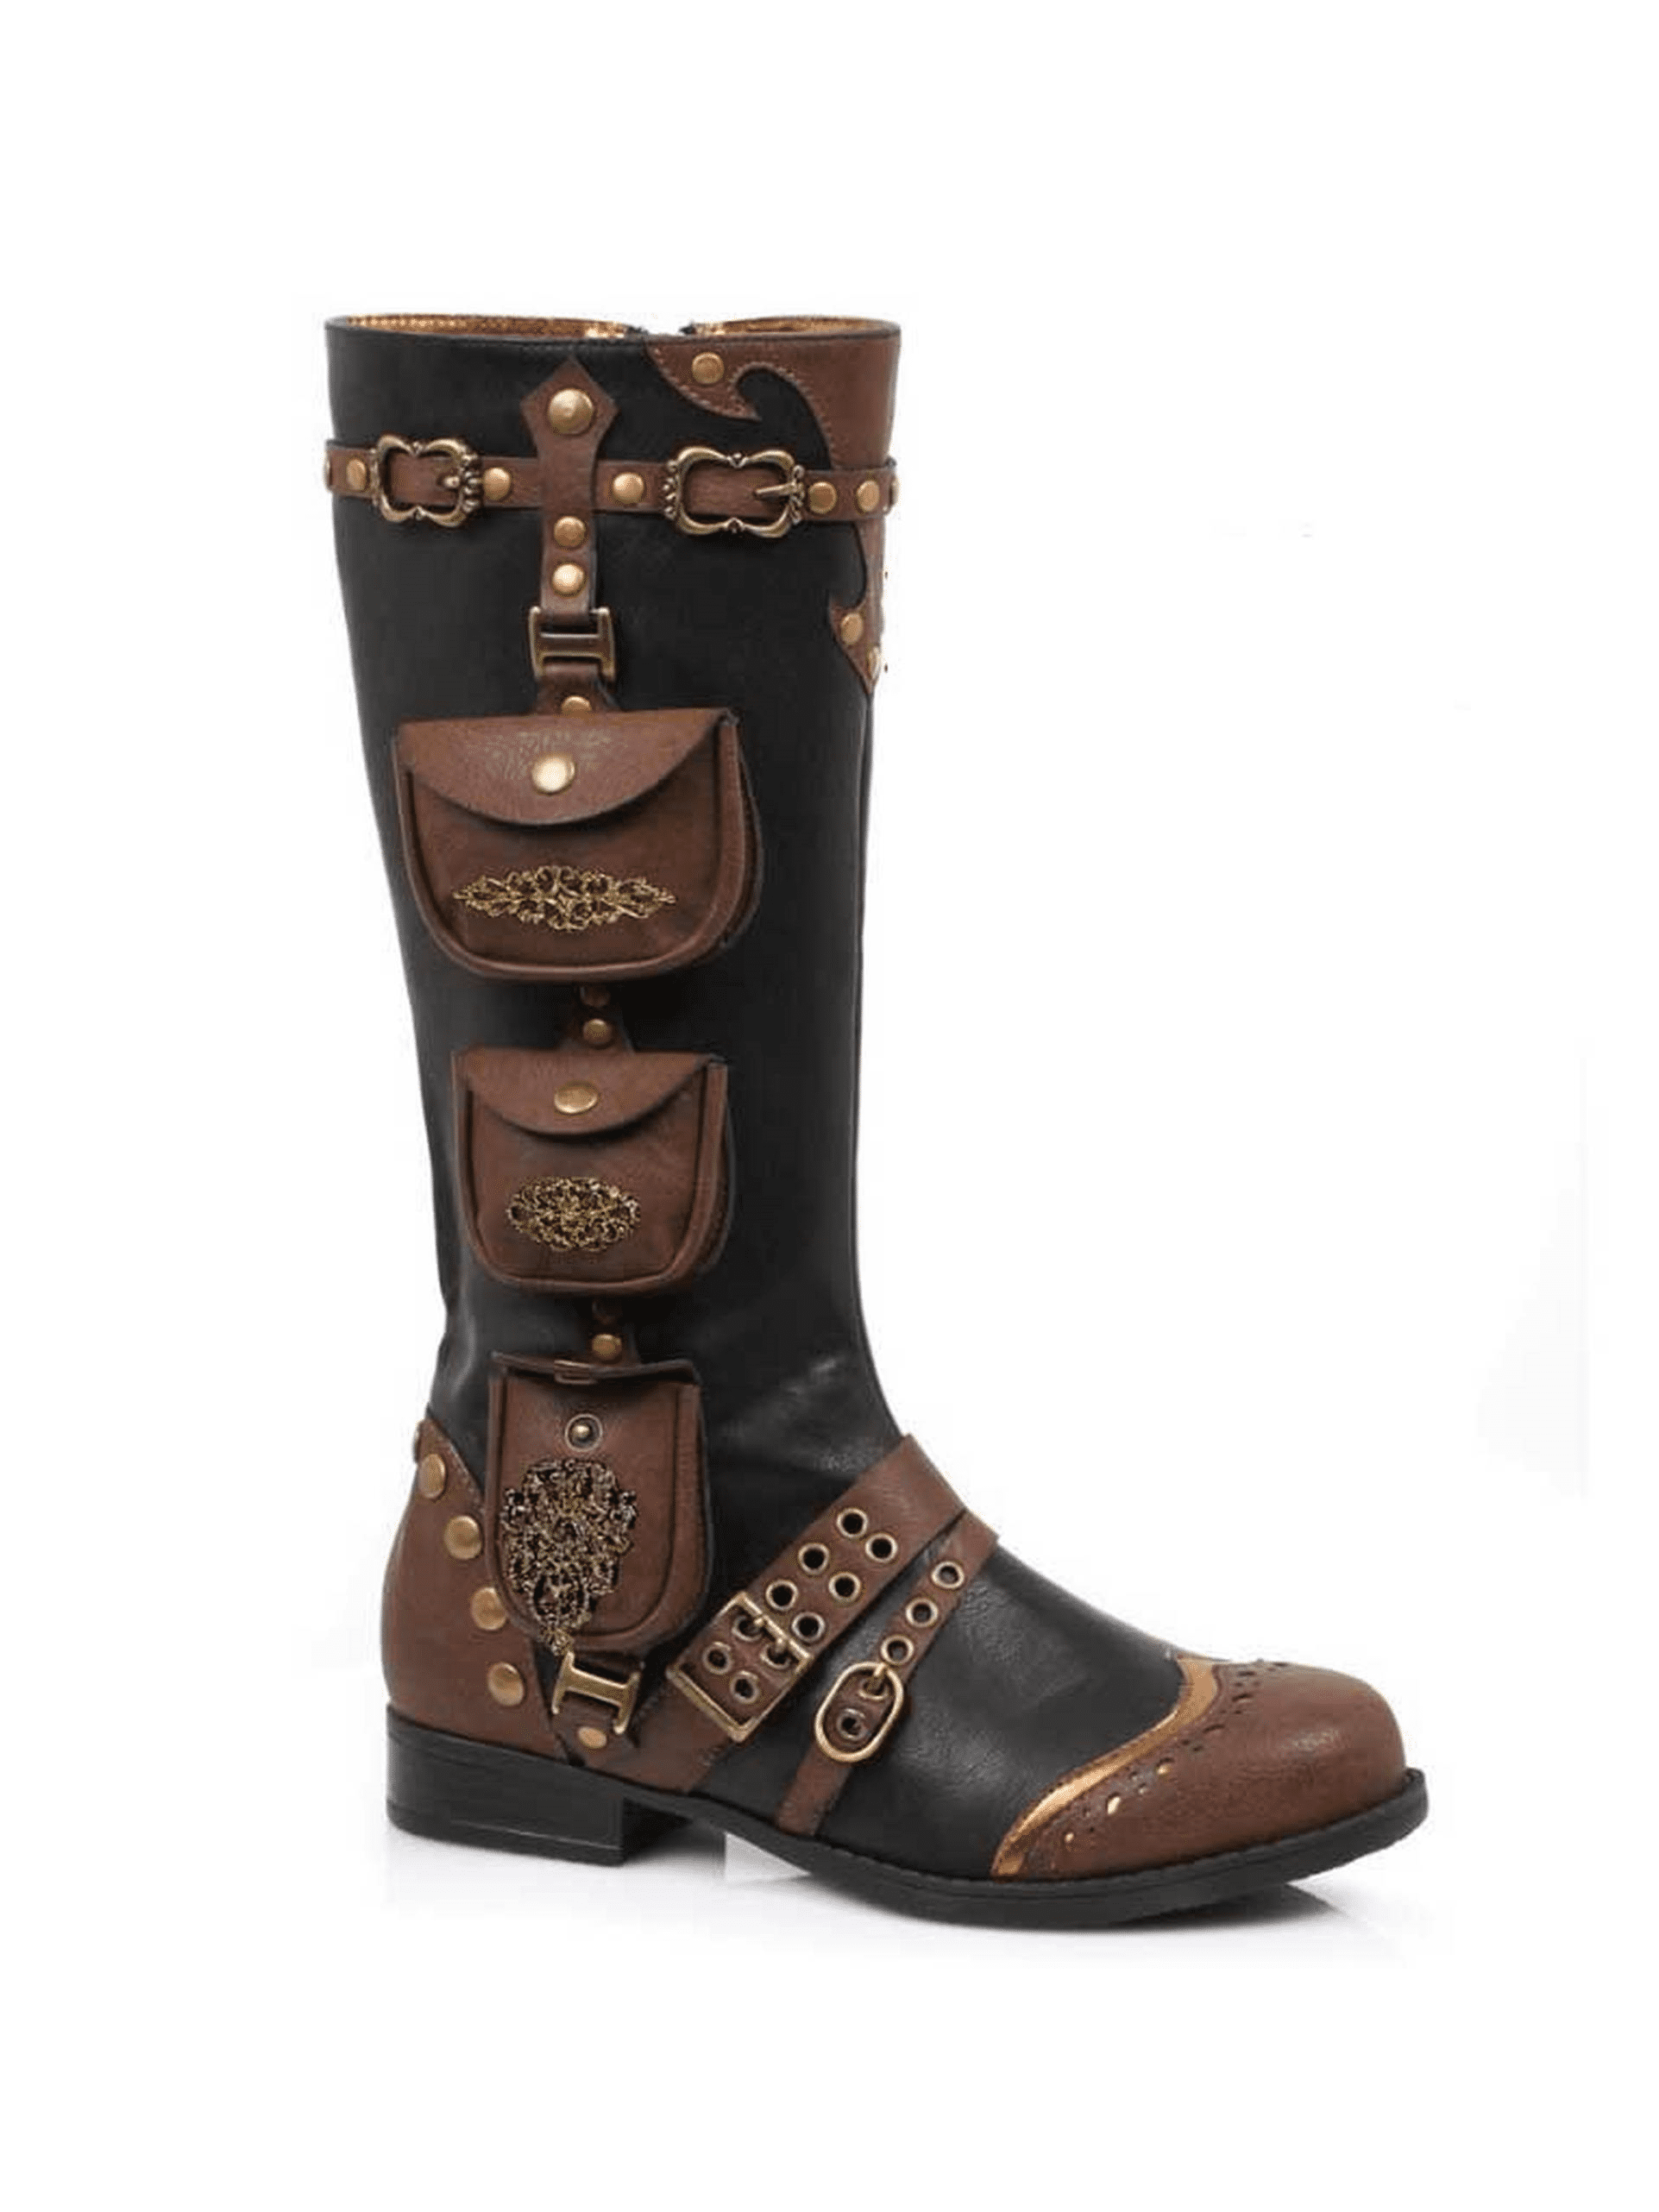 Womens 1 Inch Heels Black Knee High Boots Steampunk Brown Straps Costume Shoes